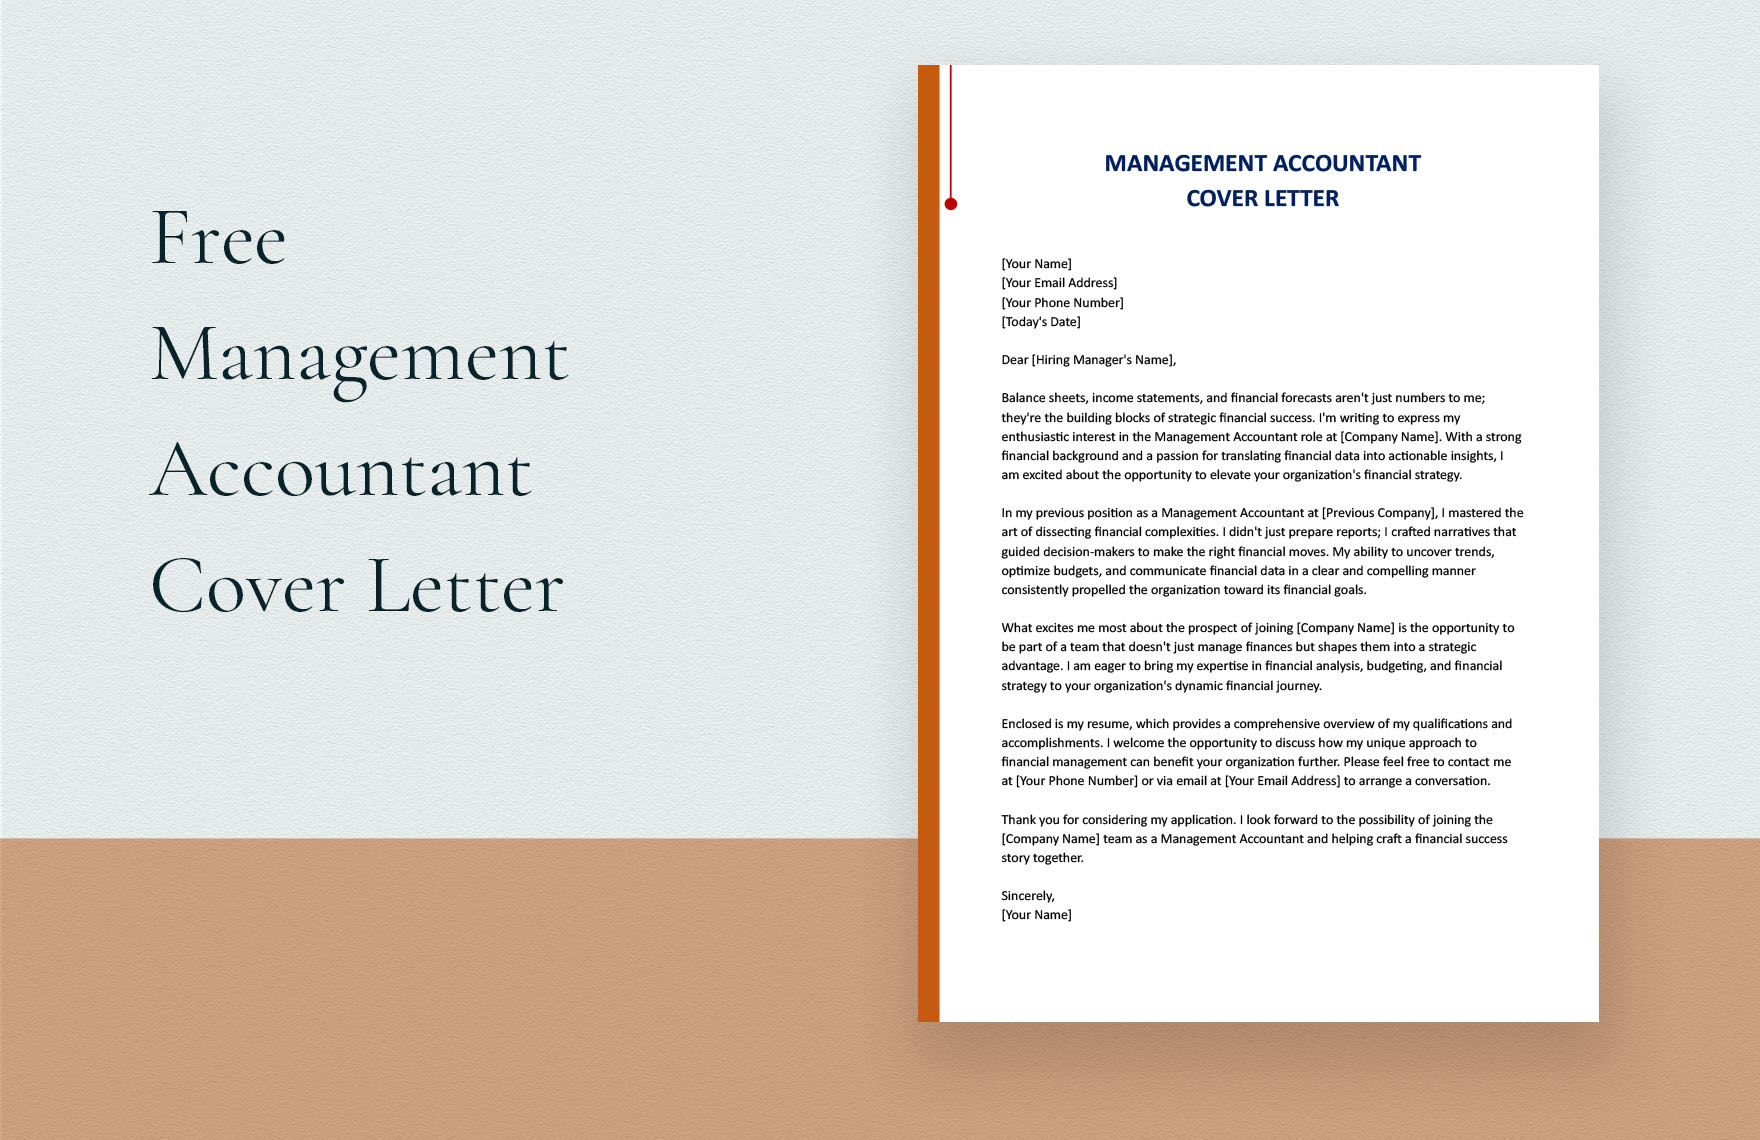 Management Accountant Cover Letter in Word, Google Docs